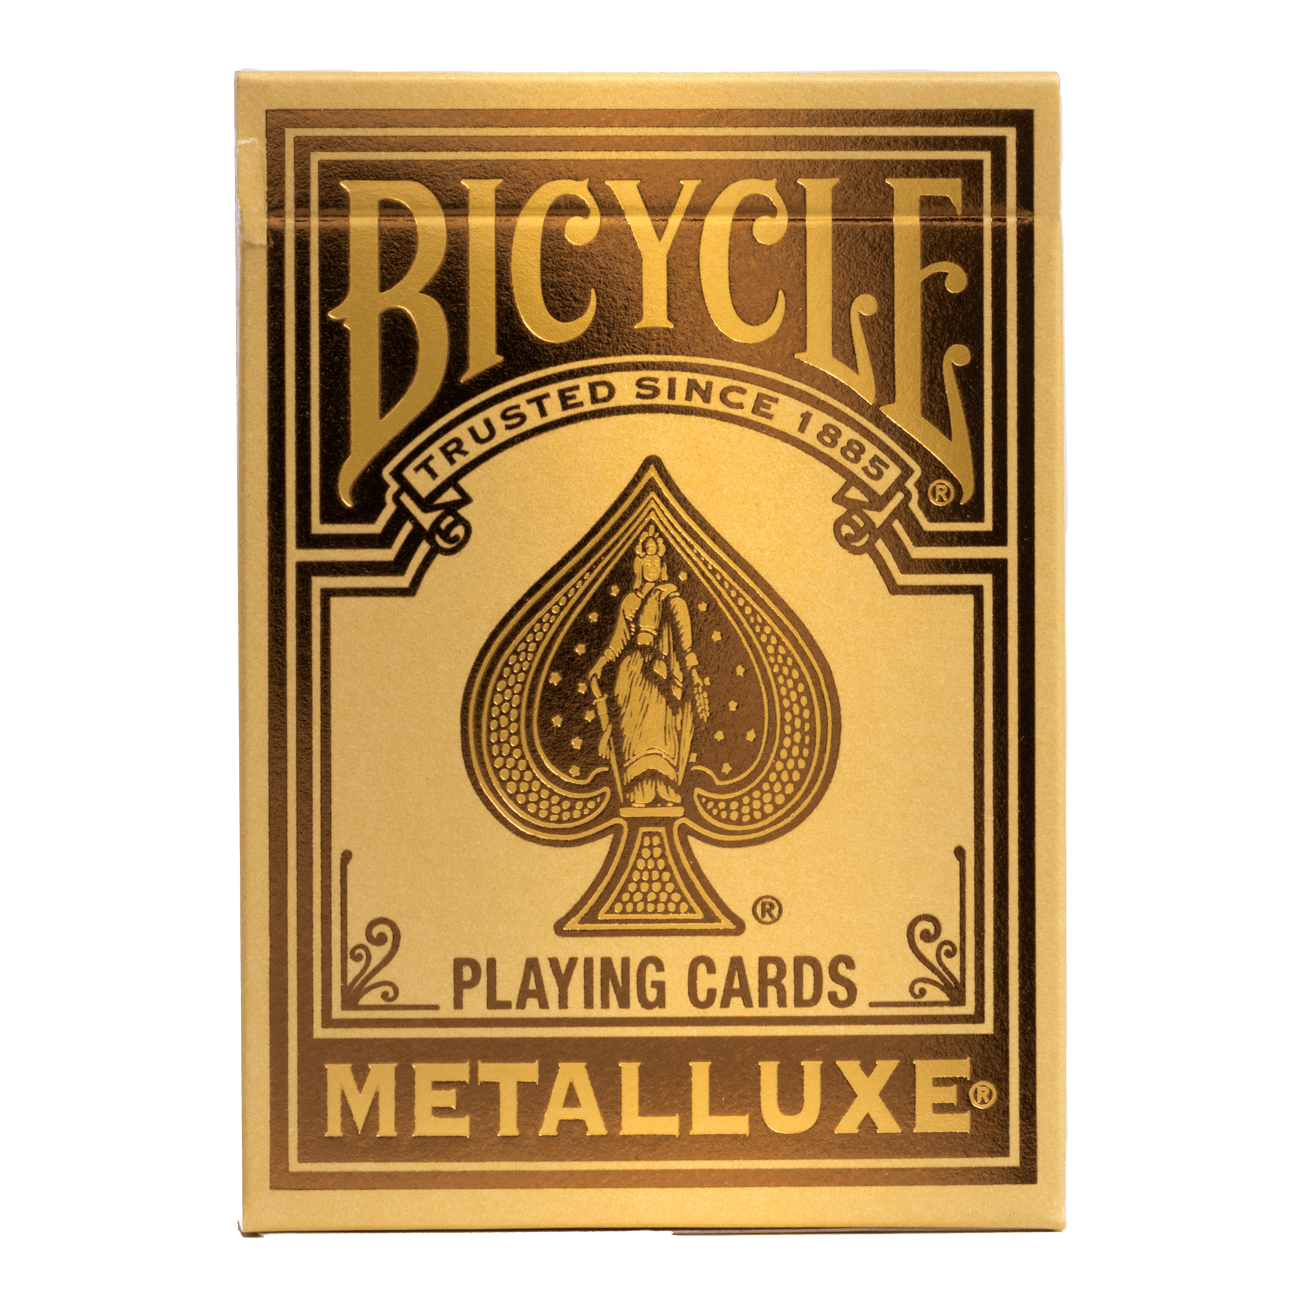 Bicycle Metalluxe Gold Playing Cards-United States Playing Cards Company-Ace Cards & Collectibles